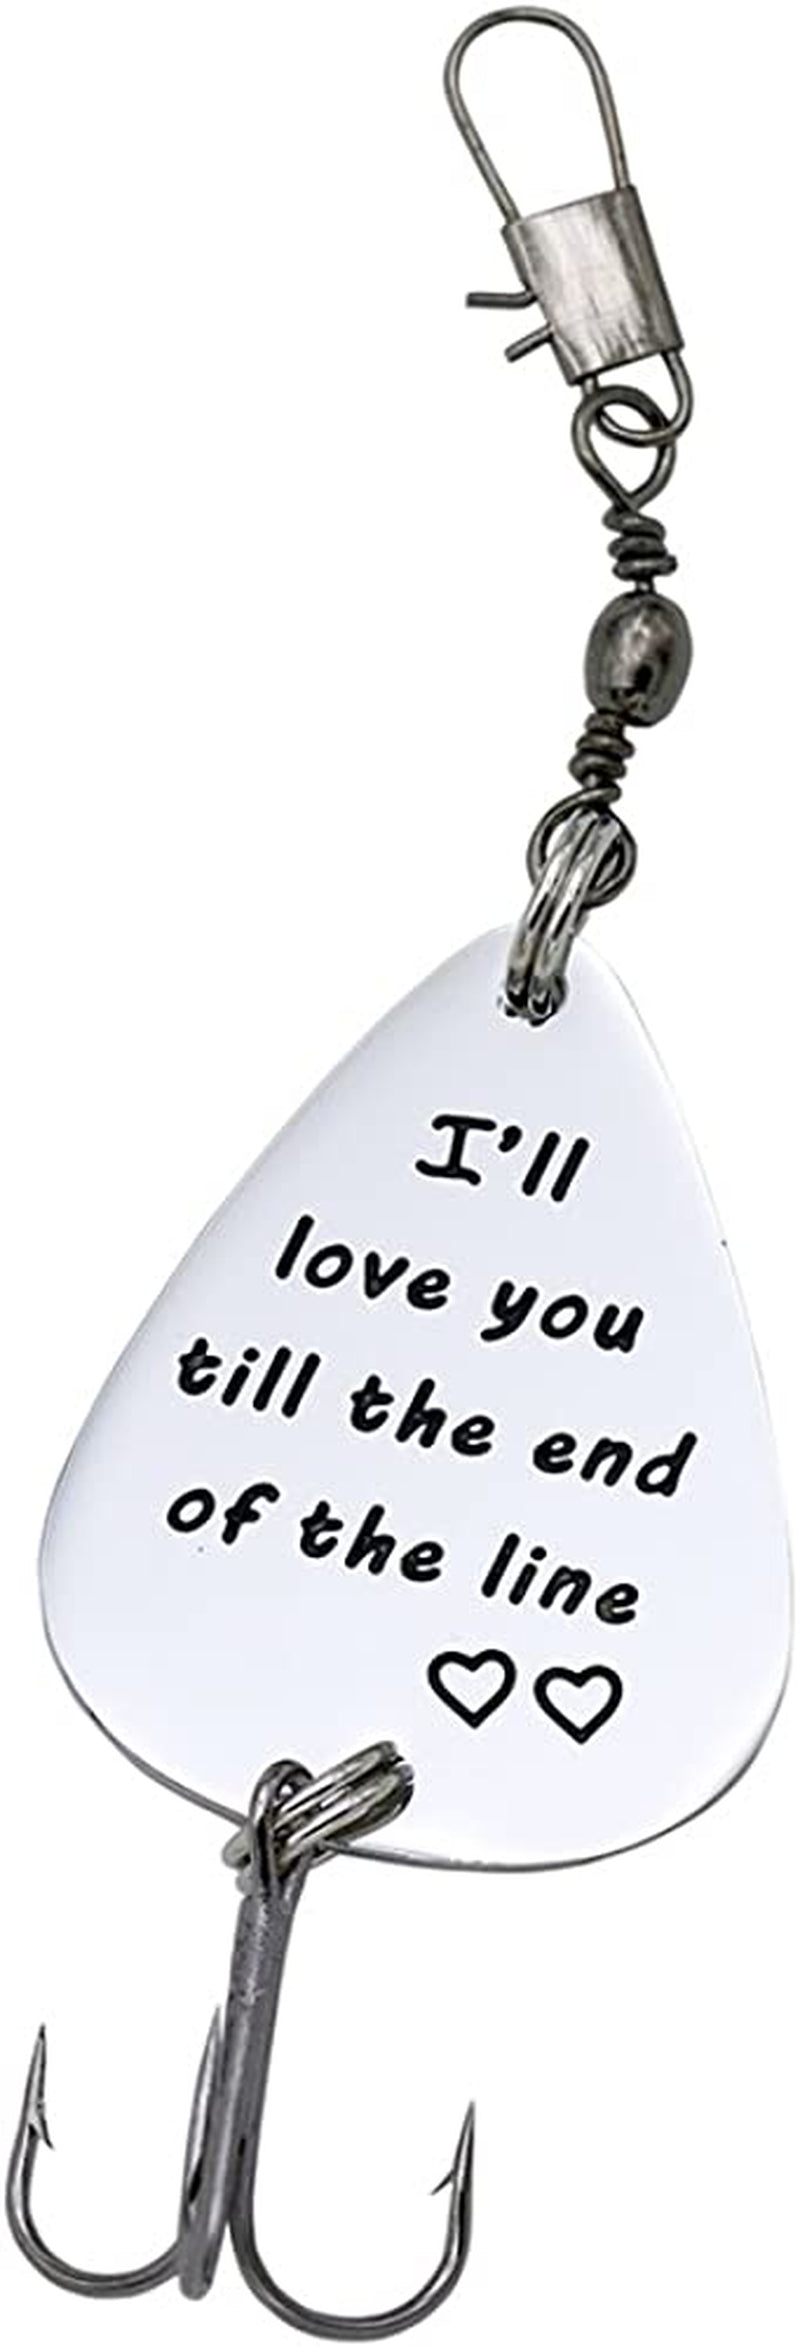 Melix Home Gift for Boyfriend Husband I'Ll Love You Till the End of the Line Fishing Lures Christmas Valentines'S Day Hook, Line and Sinker Fisherman Gift for Husband